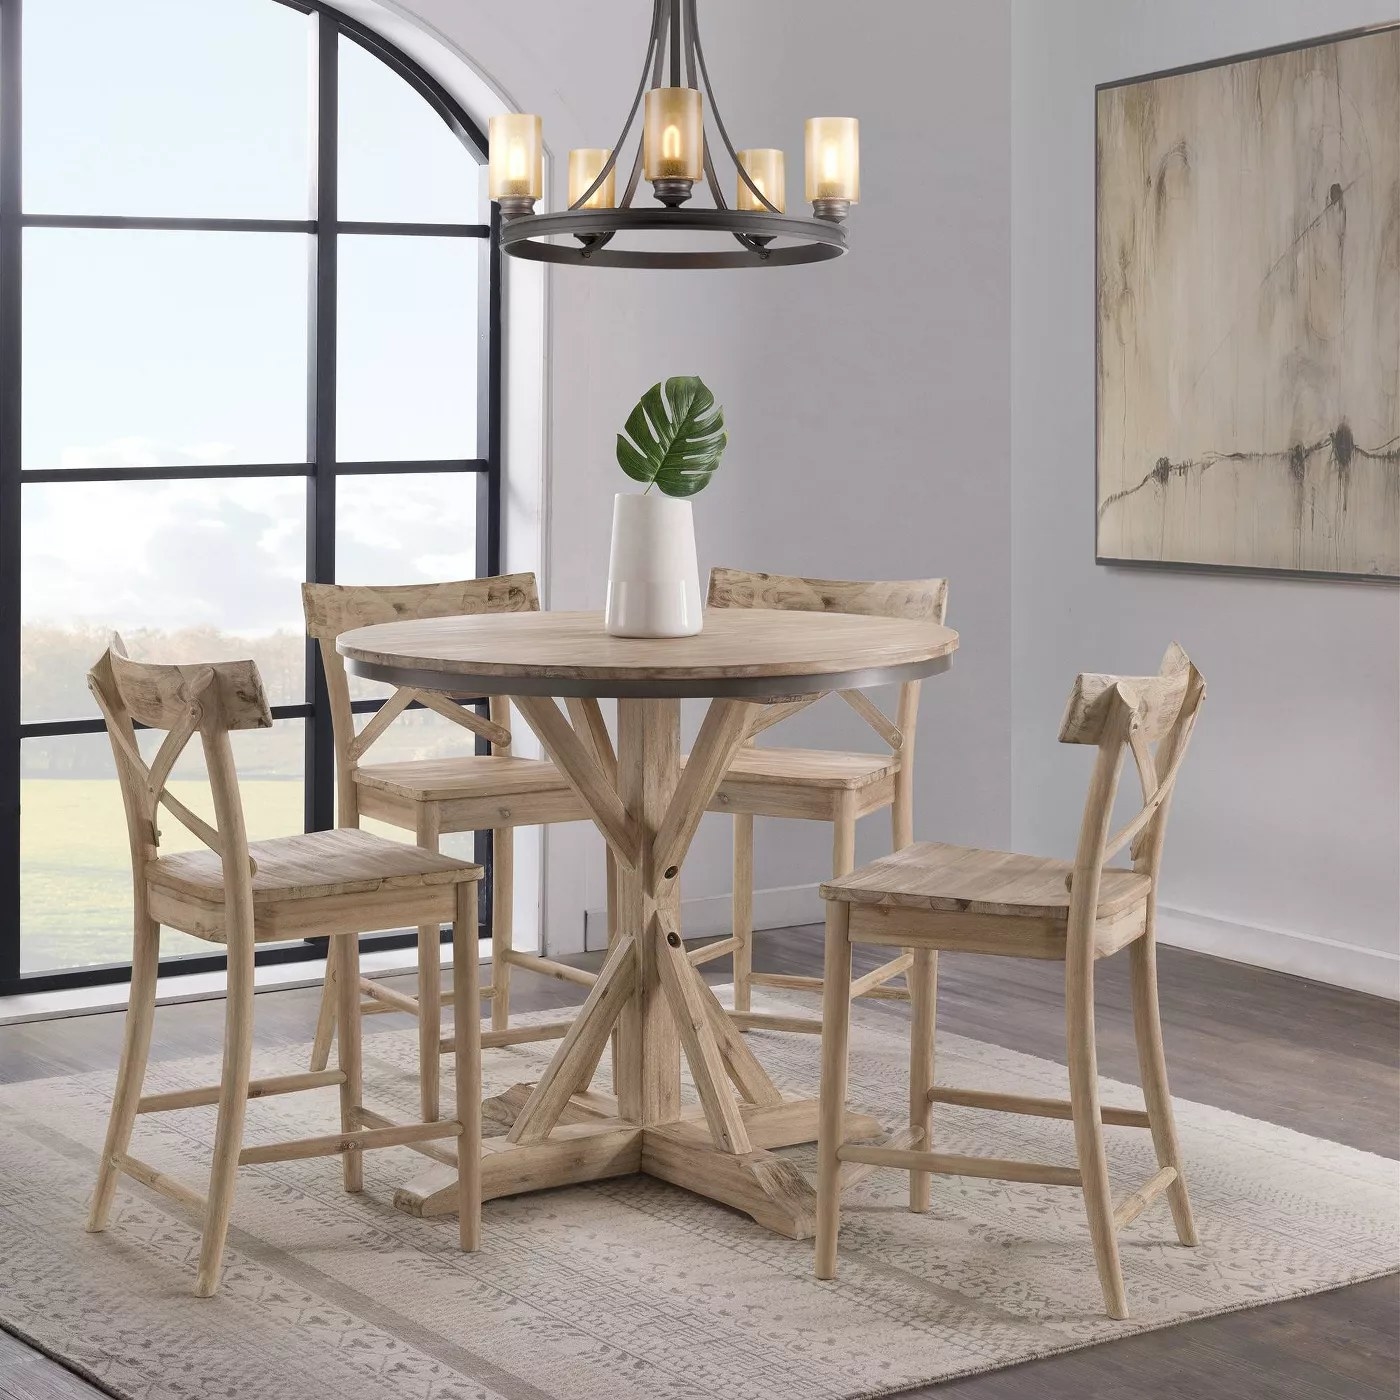 The rustic design chairs